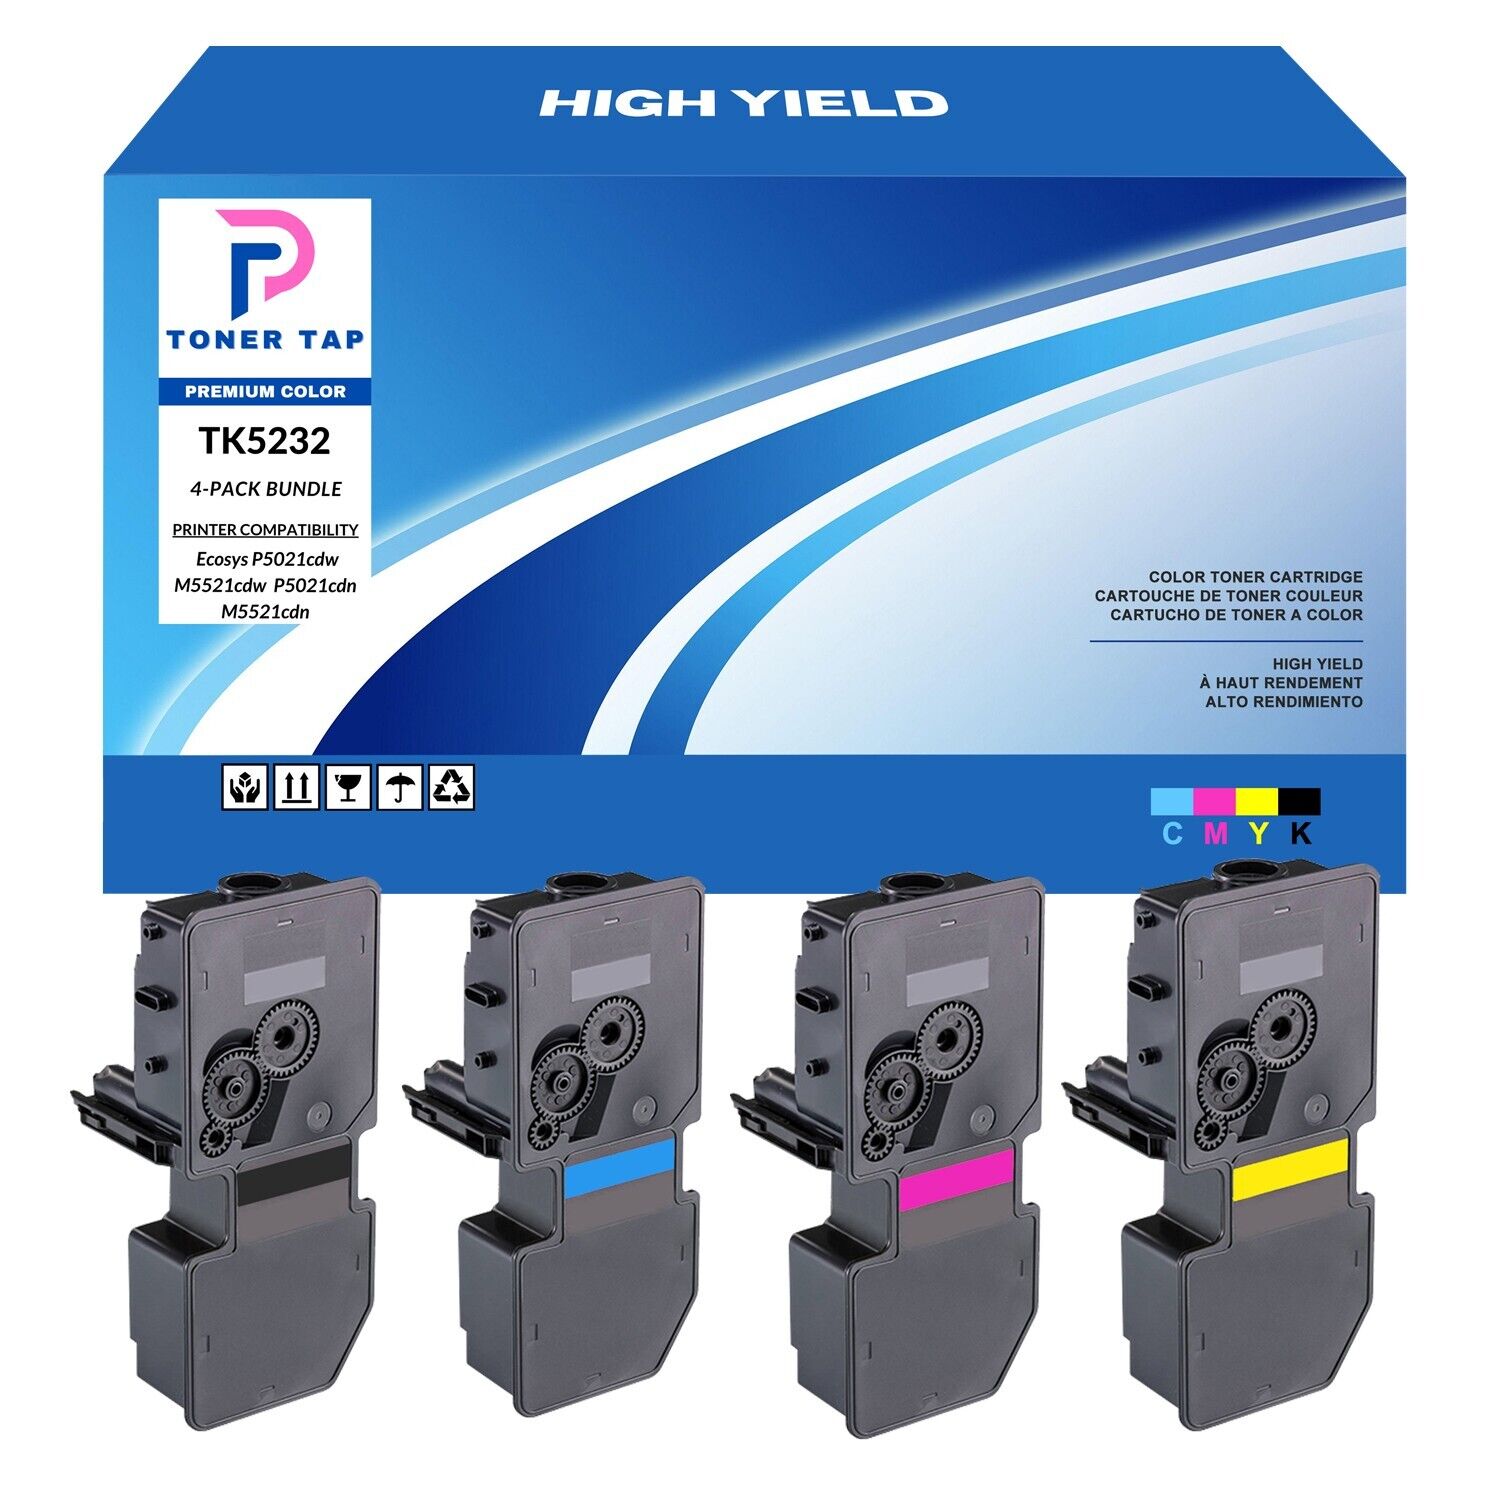 Toner High Yield for Kyocera Ecosys P5021cdw M5521cdw P5021cdn M5521 Compatible